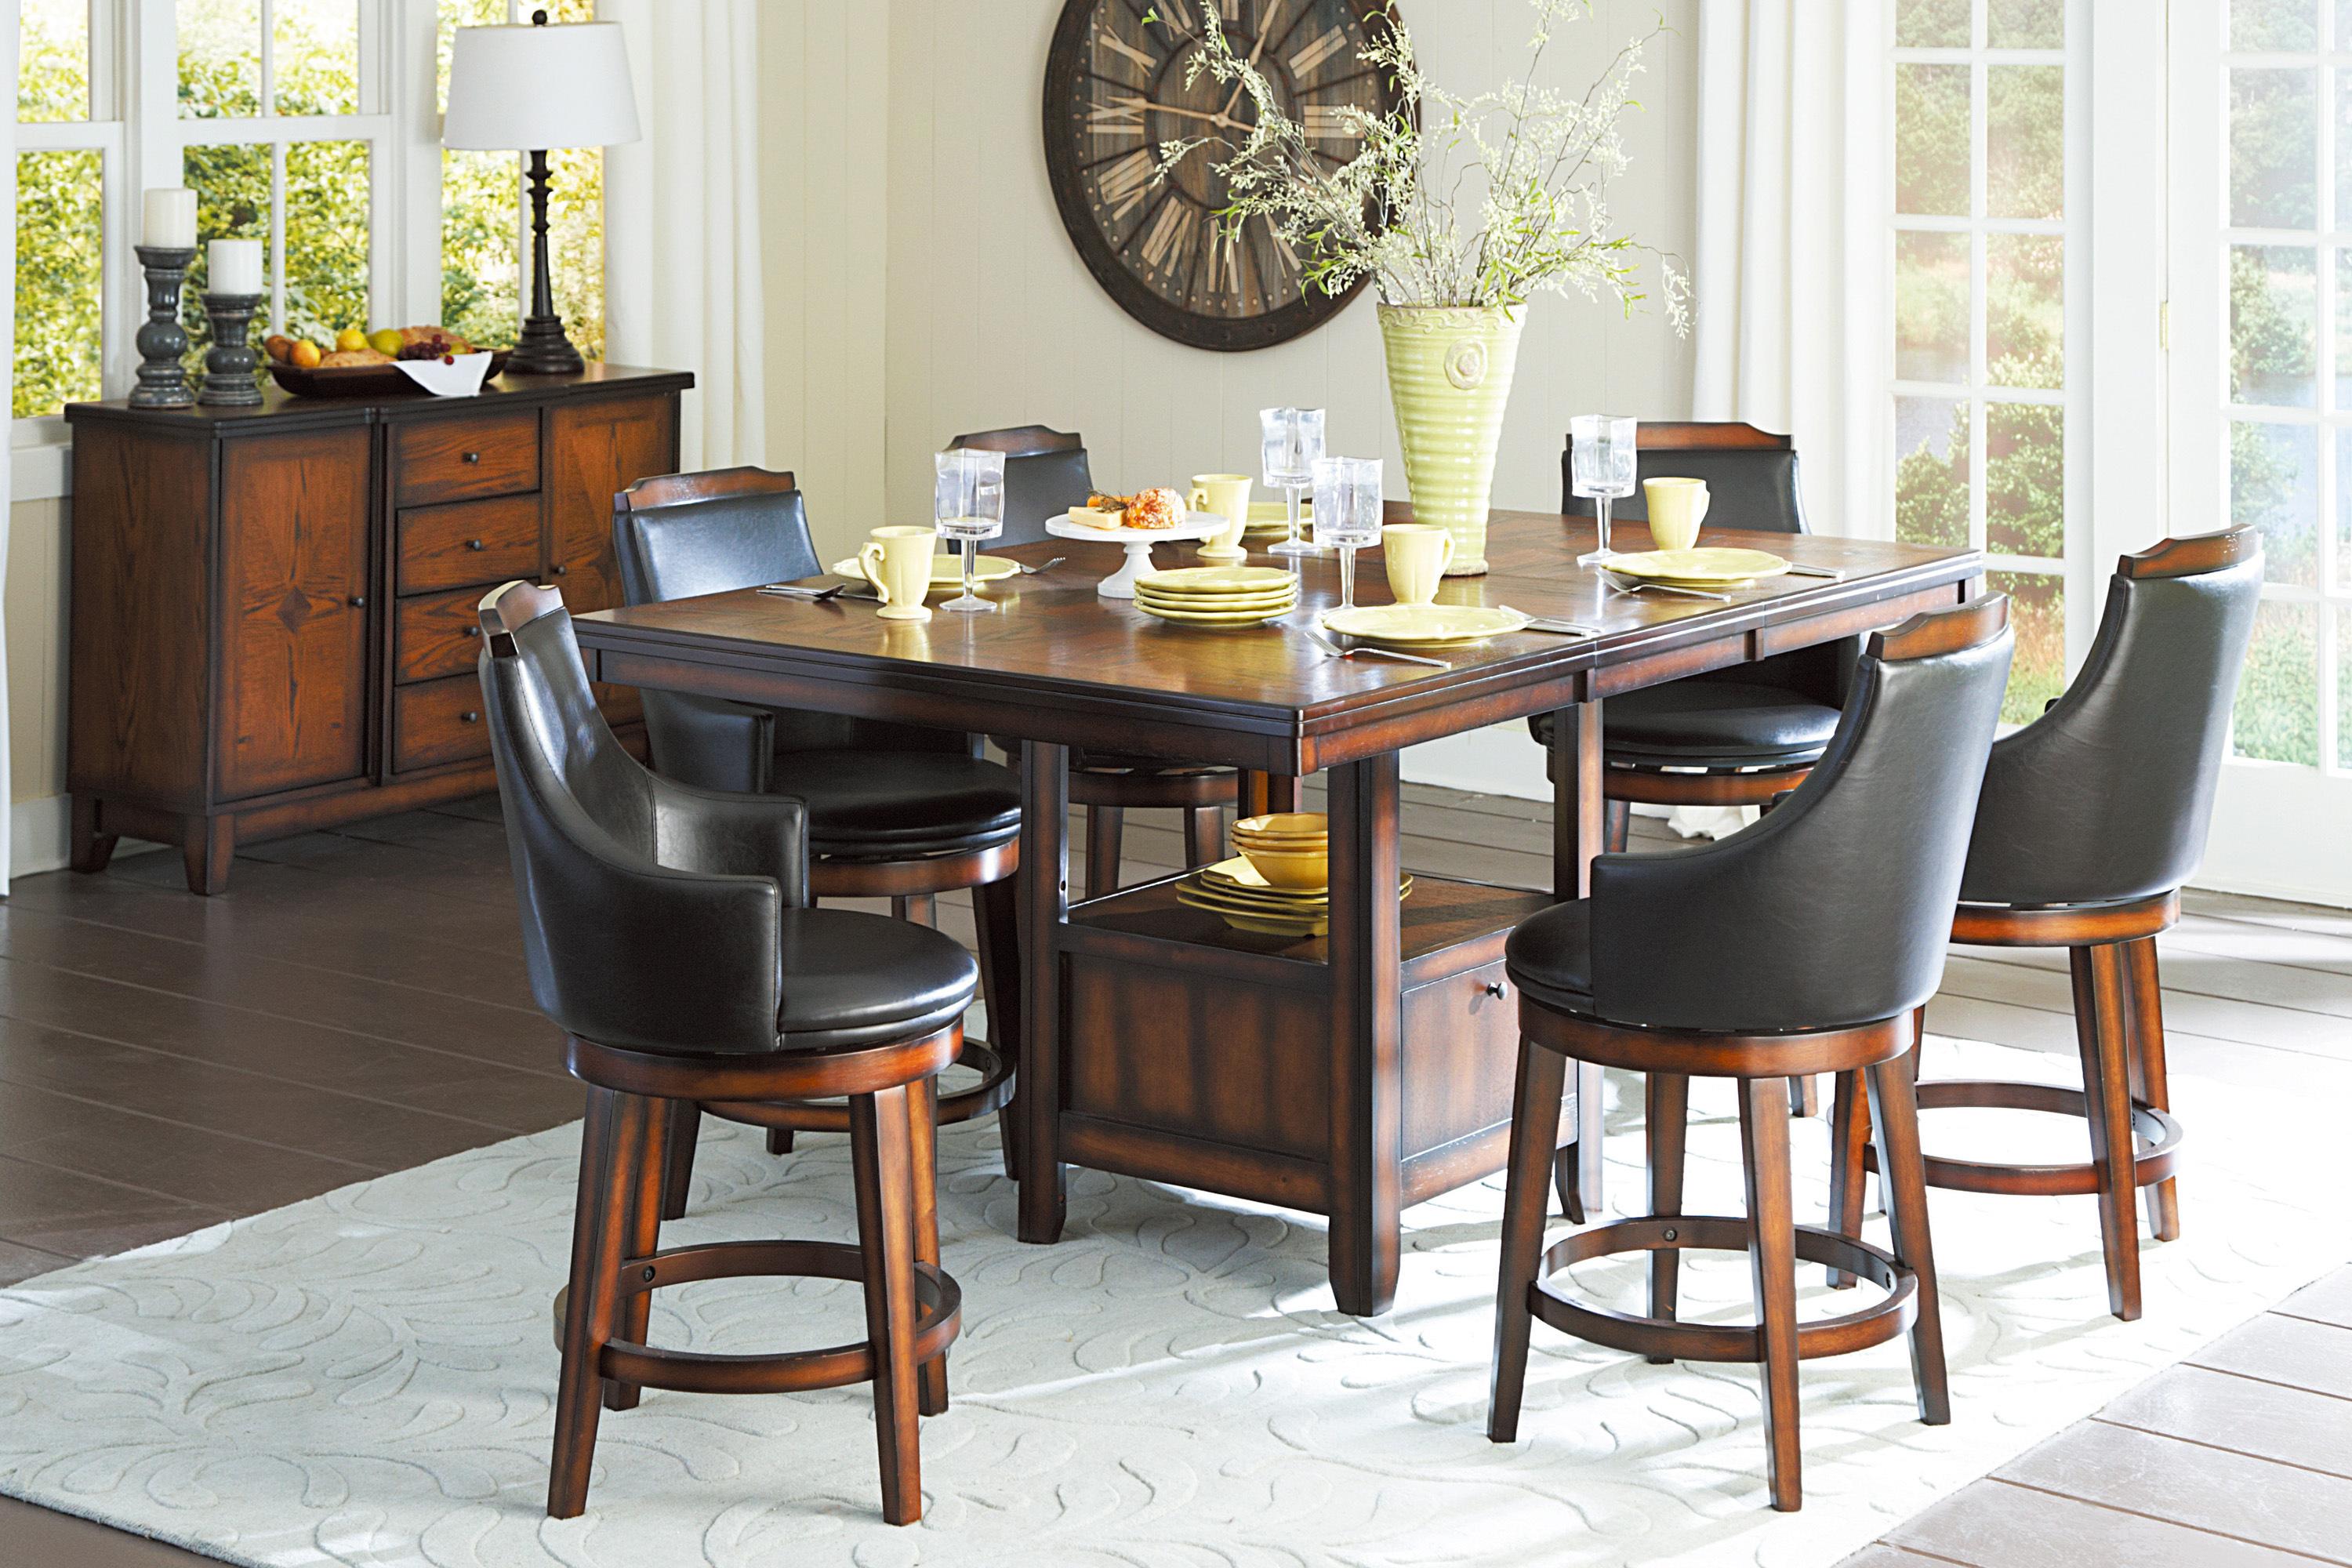 Transitional Dining Table Set 5447-36XL-7PC Bayshore 5447-36XL-7PC in Oak, Dark Brown Faux Leather